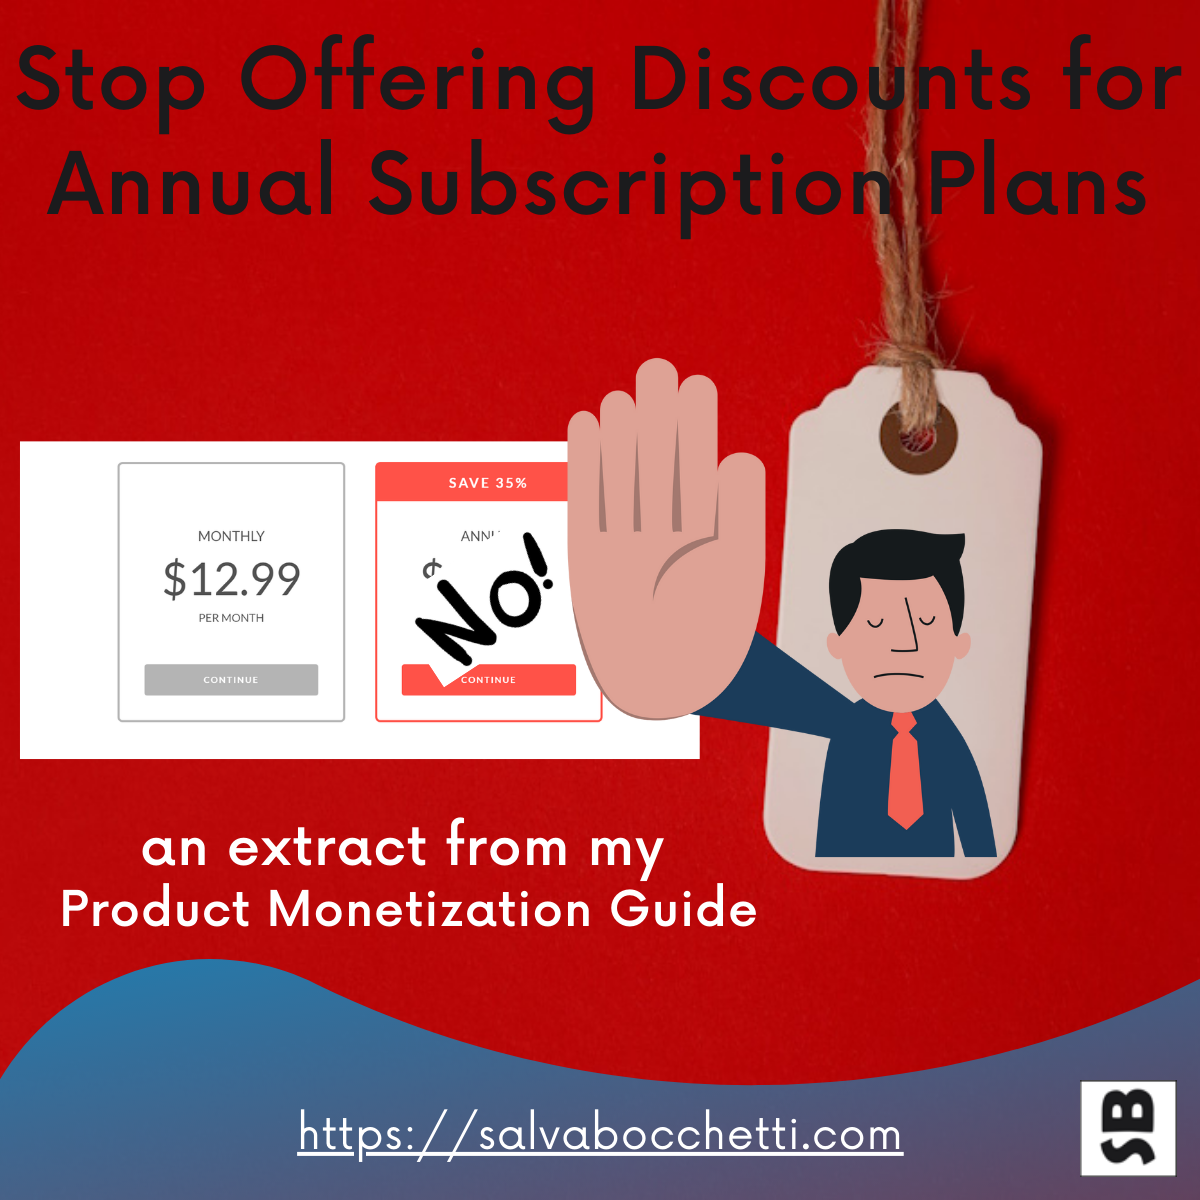 Stop Offering Discounts for Annual Subscription Plans